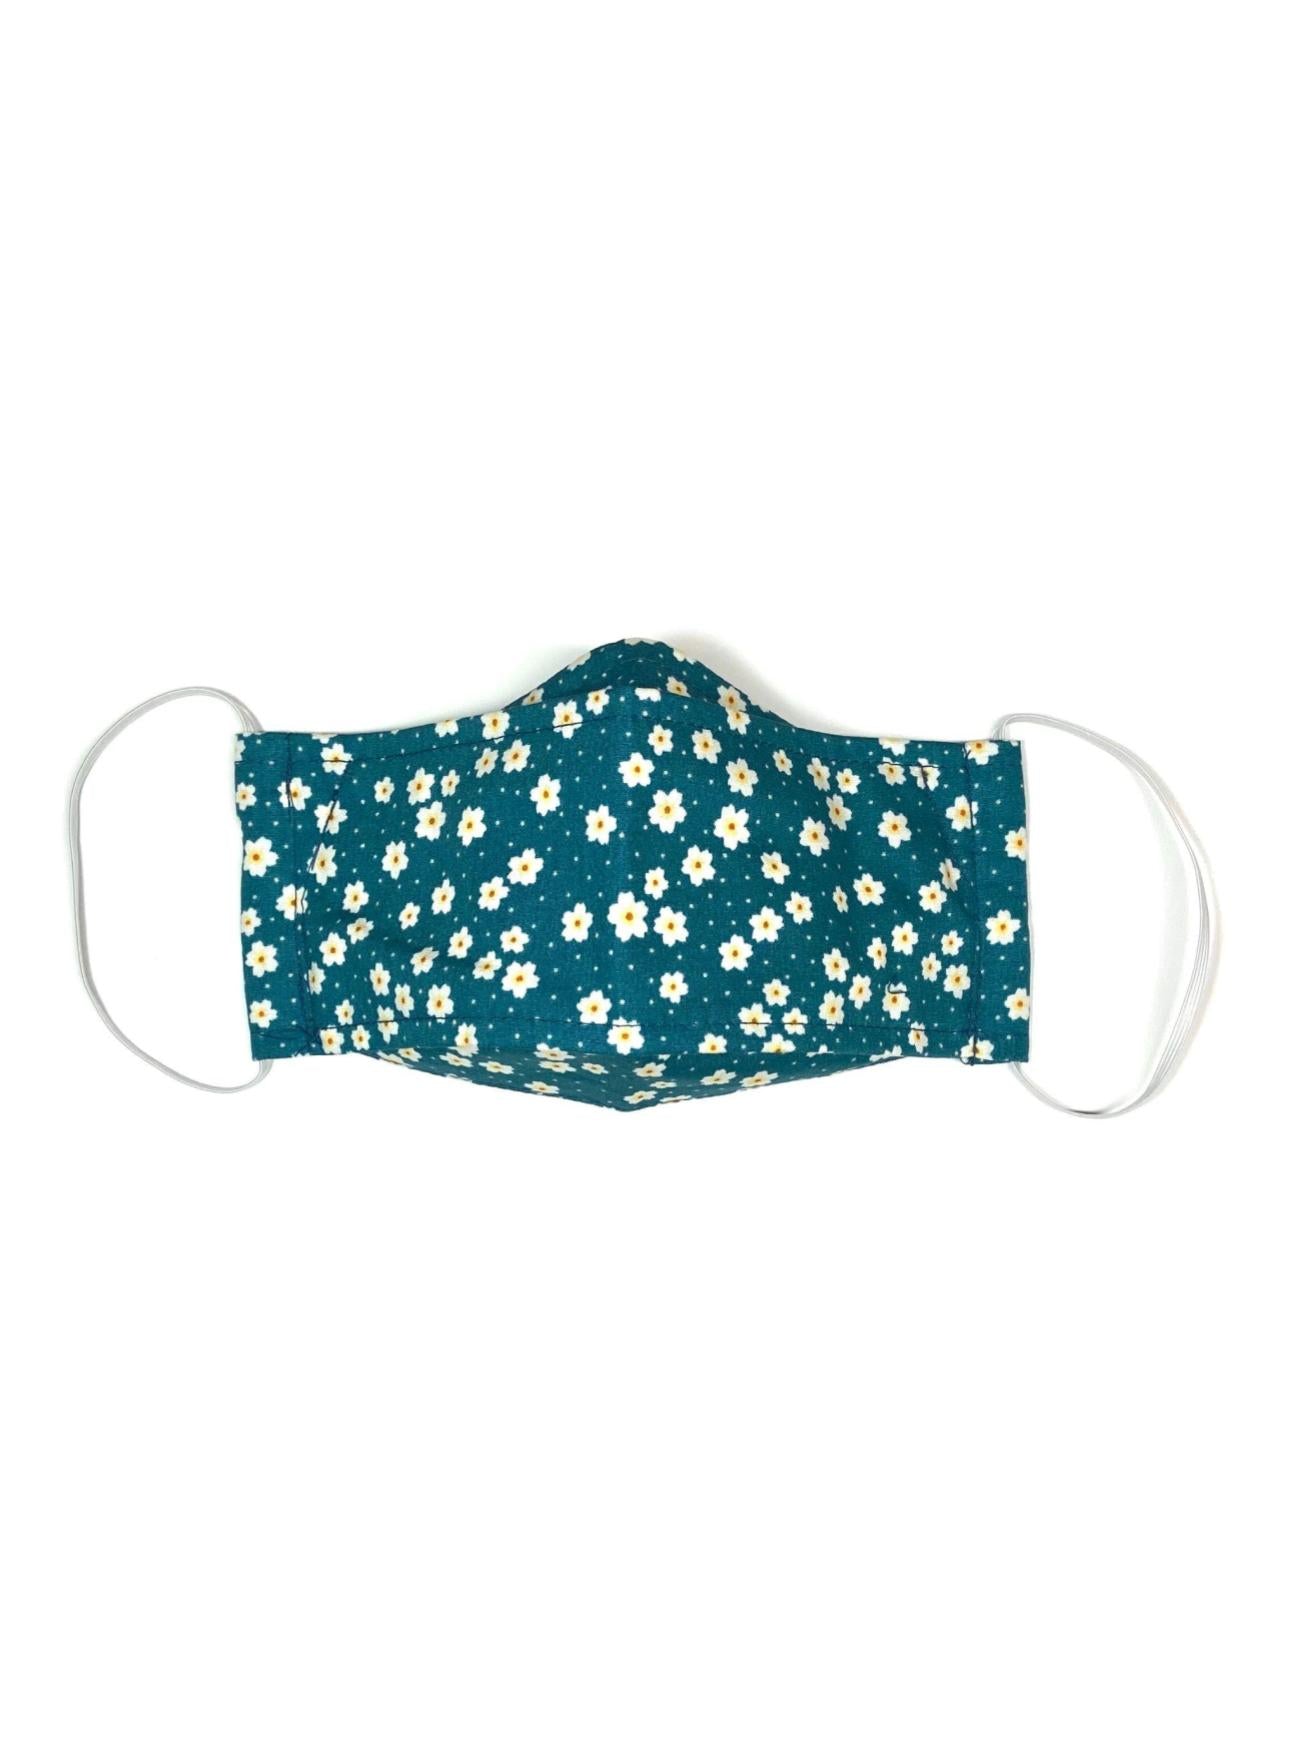 Teal Blue Floral, Child's Reusable Face Mask [3-layers]